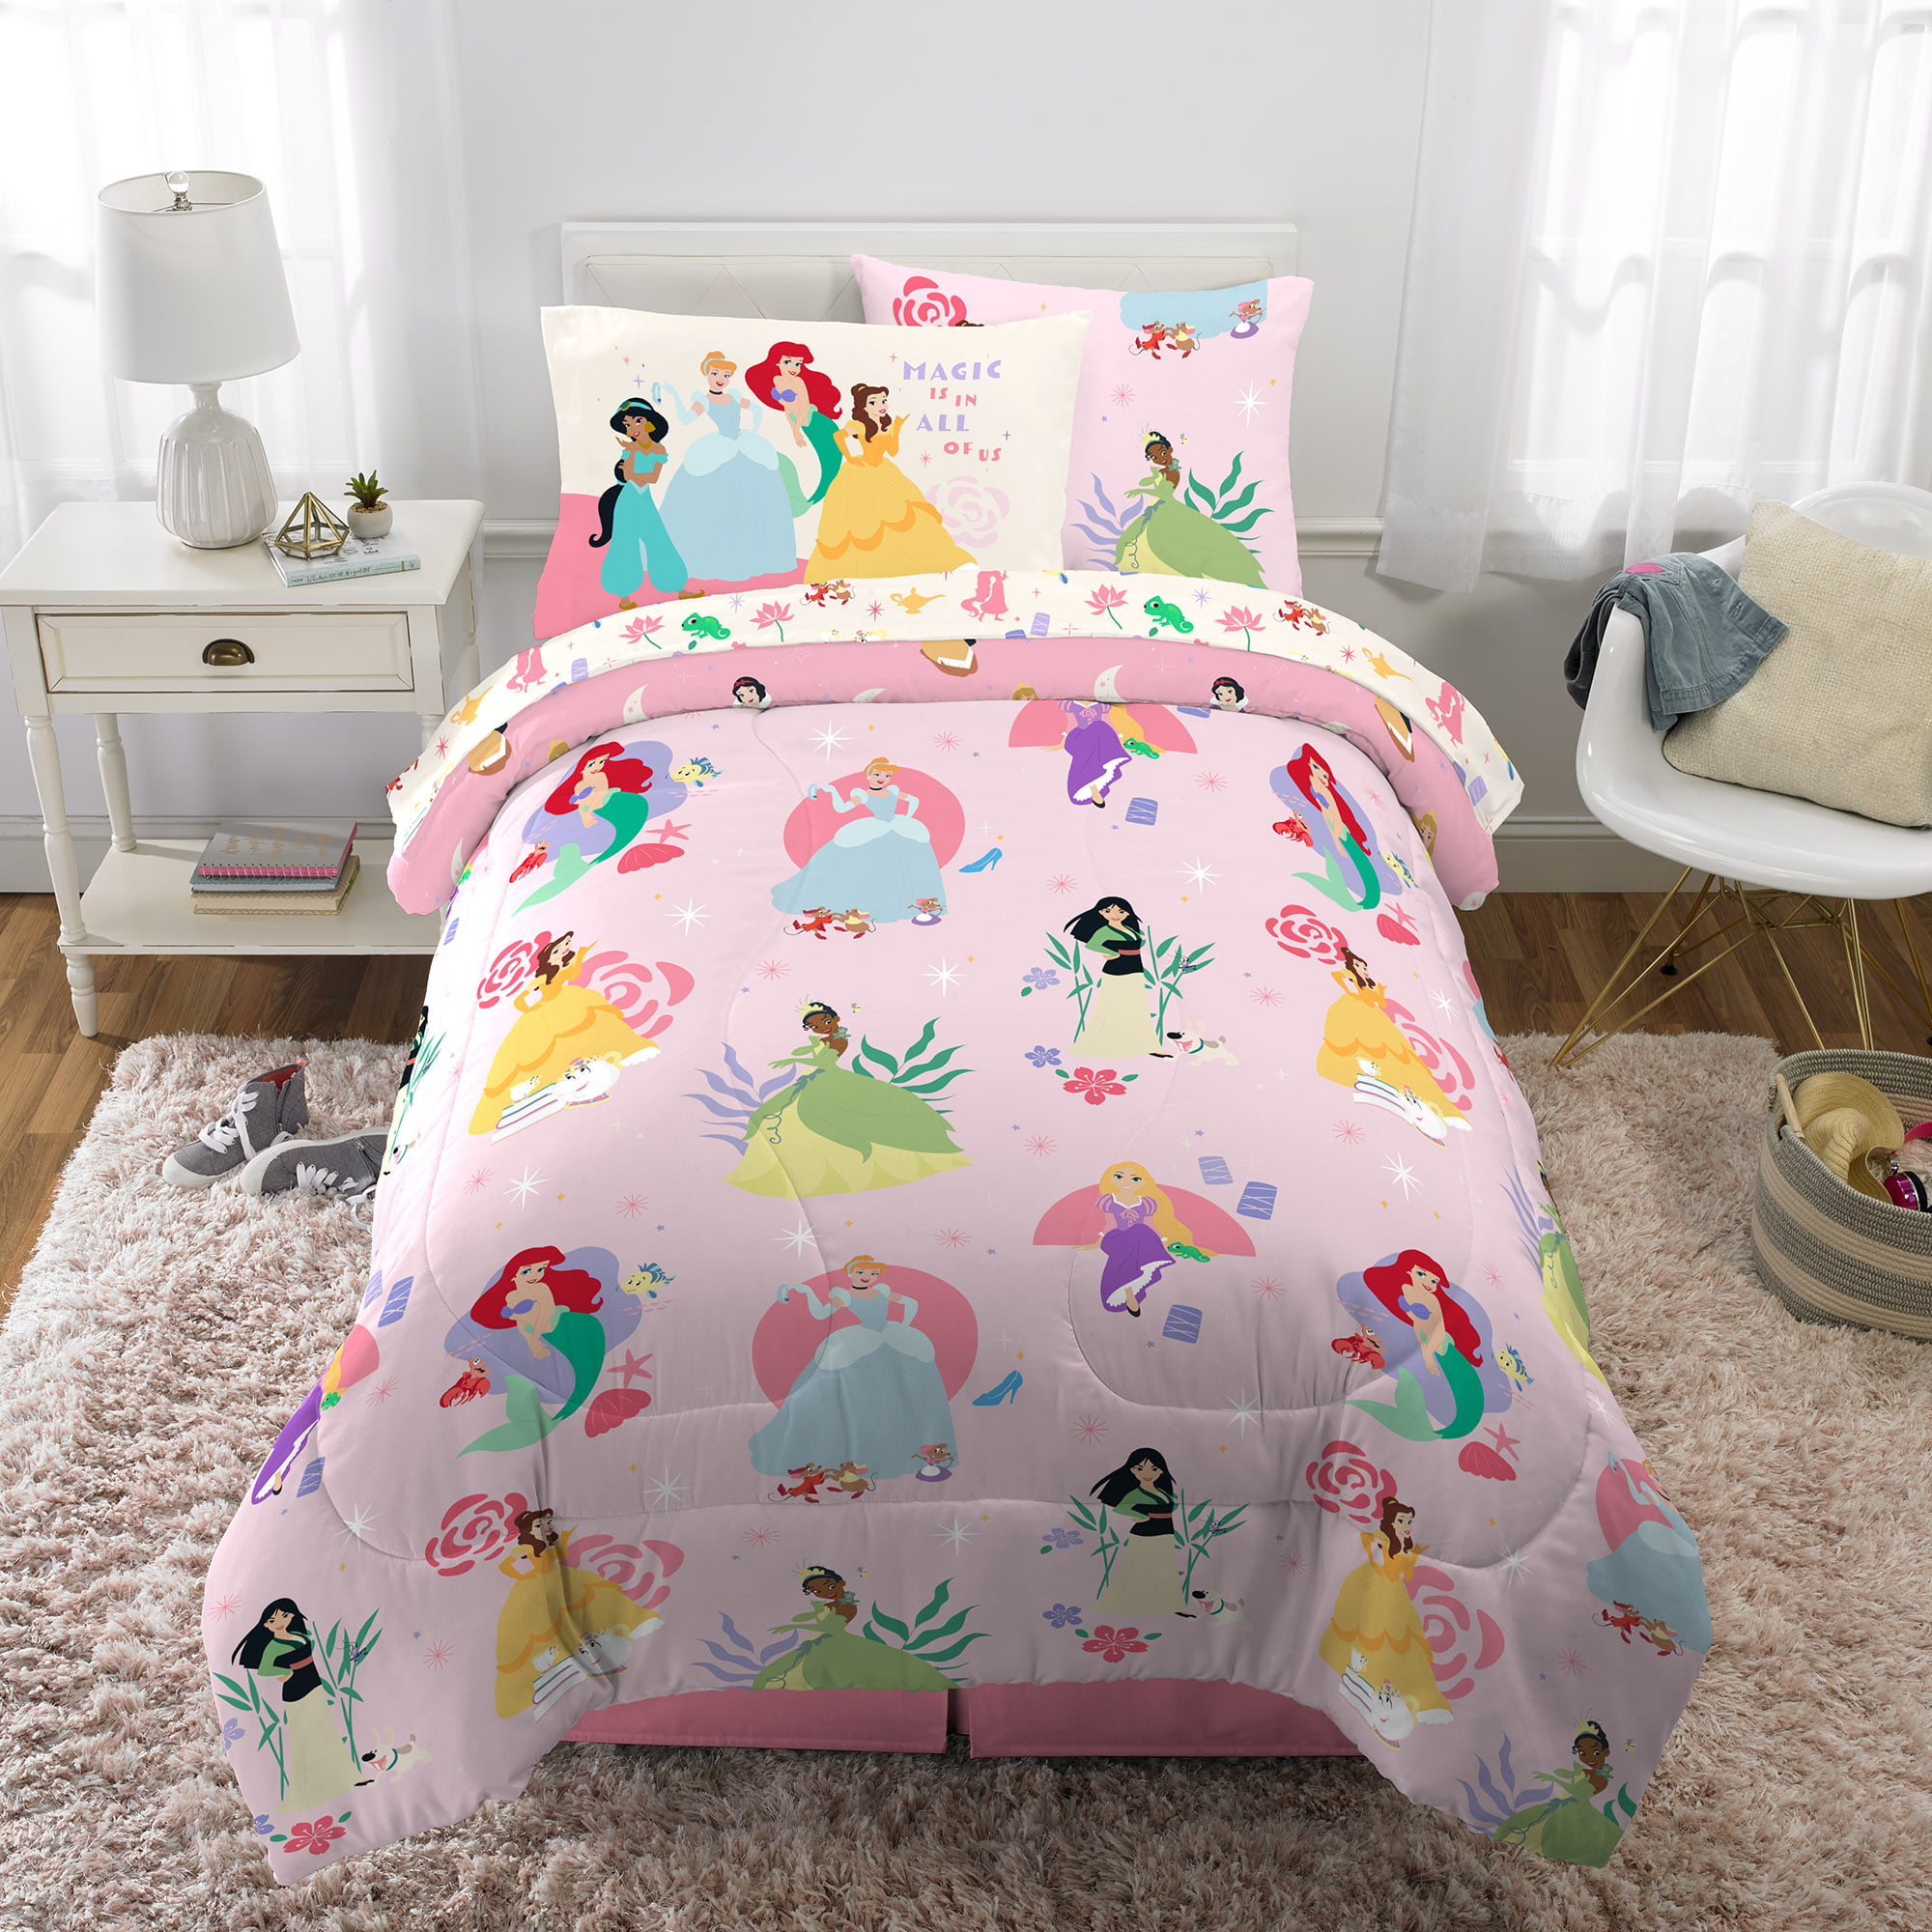 Princess Flat and Fitted Bed sheets Twin Single 3 Sheets sold separately 